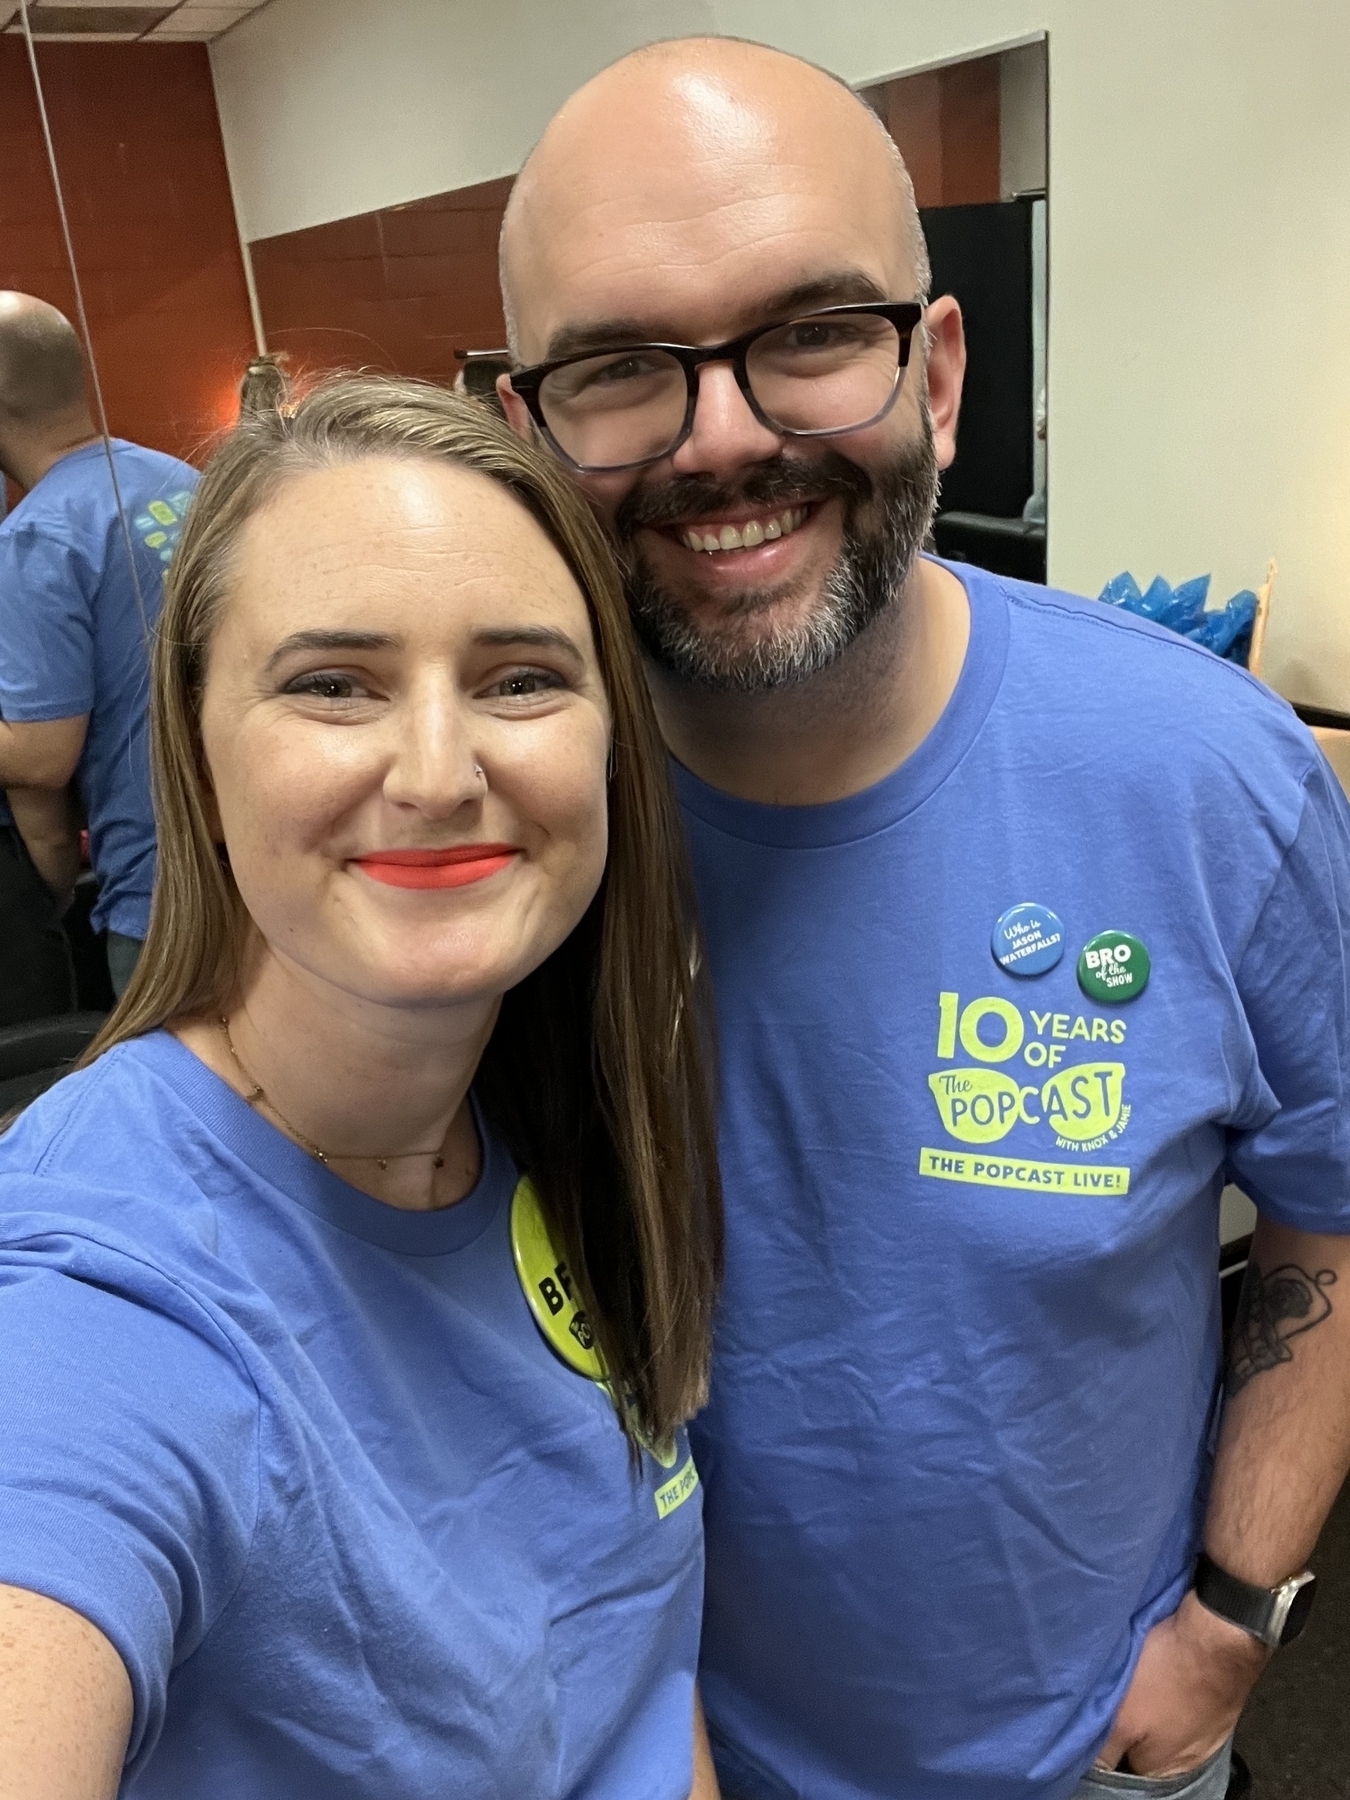 My wife and I in our volunteer shirts for The Popcast Live